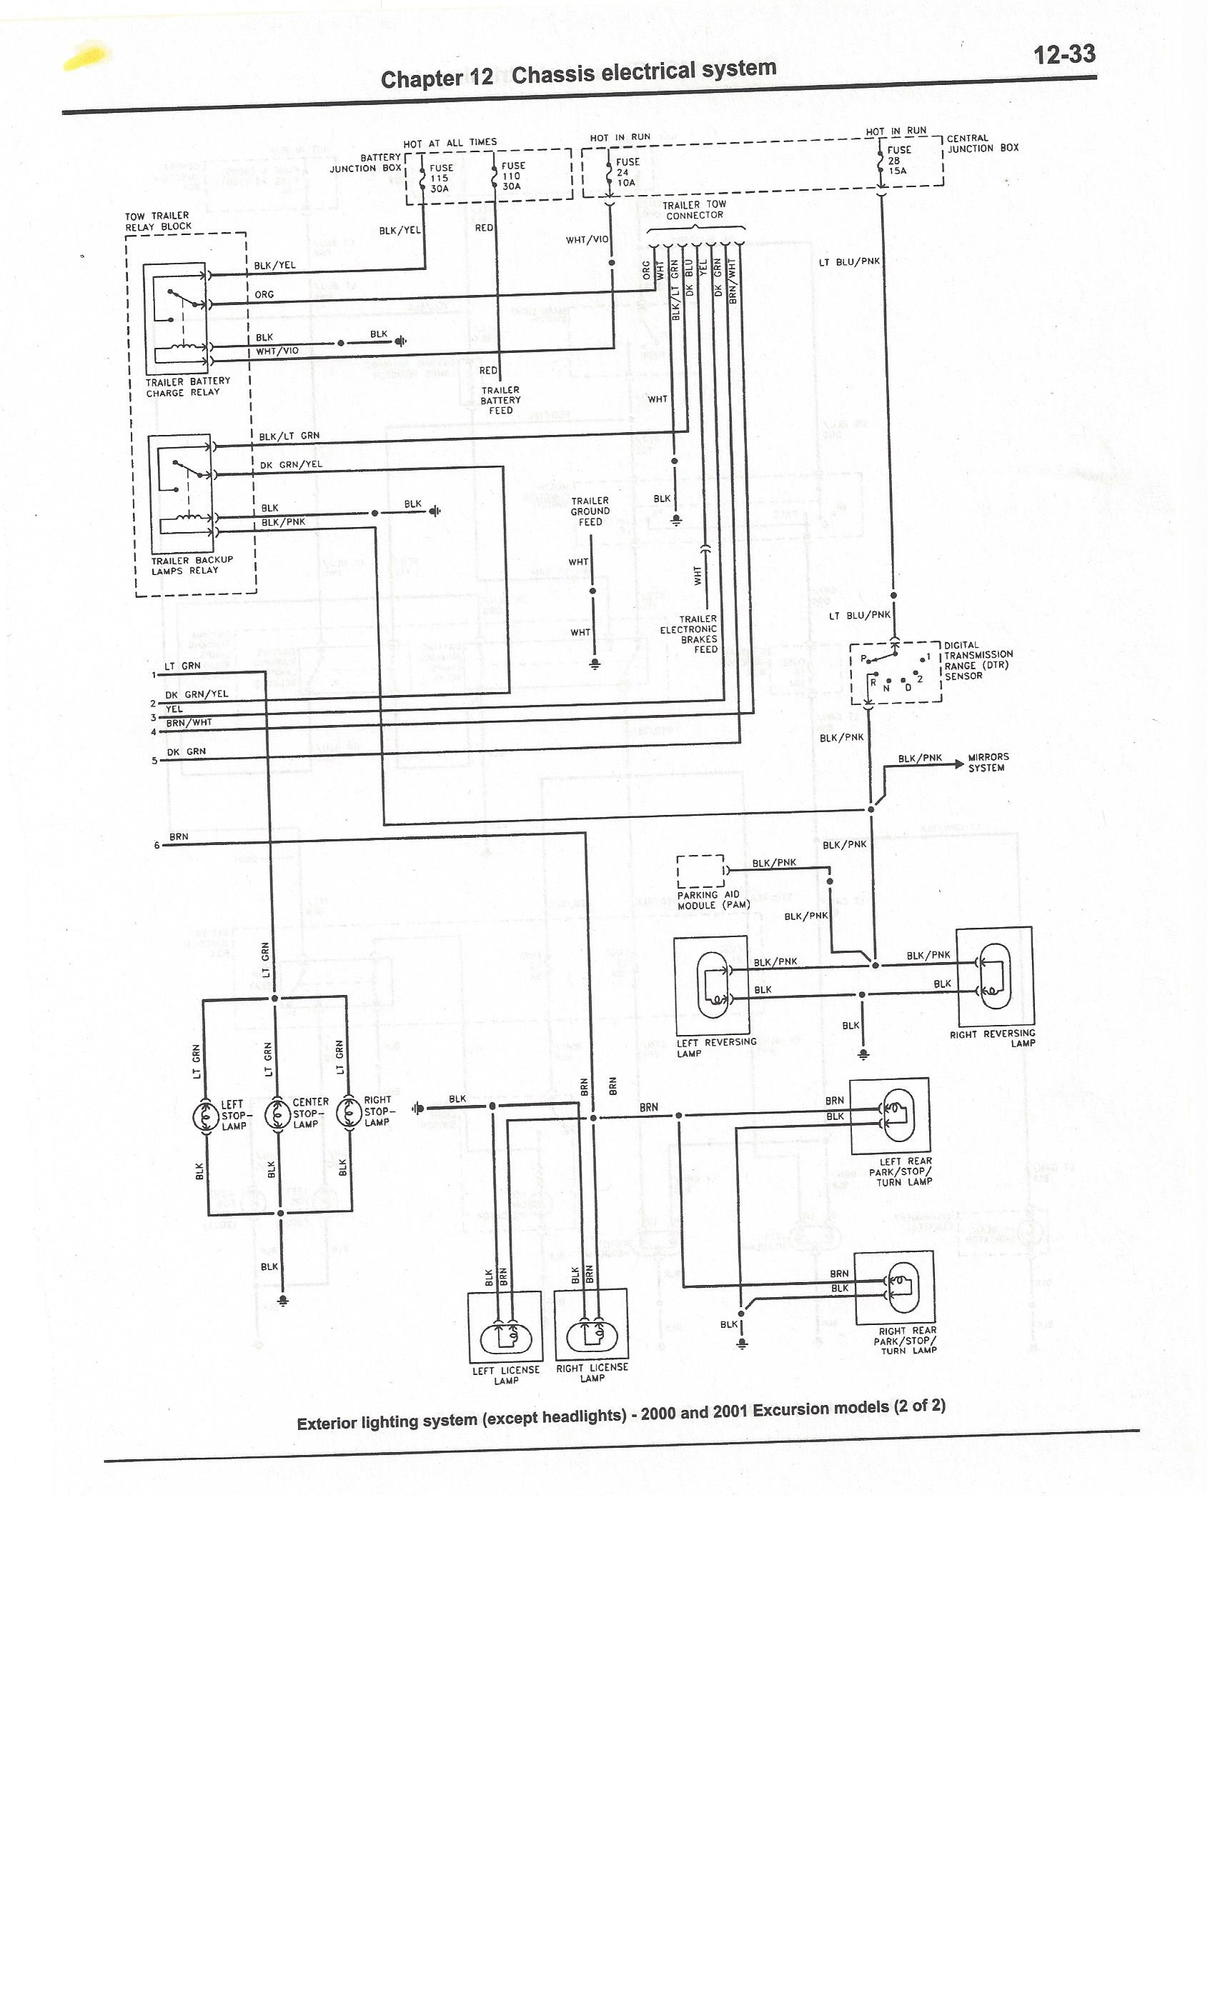 Complete Excursion Wiring Diagrams so far - Ford Truck Enthusiasts